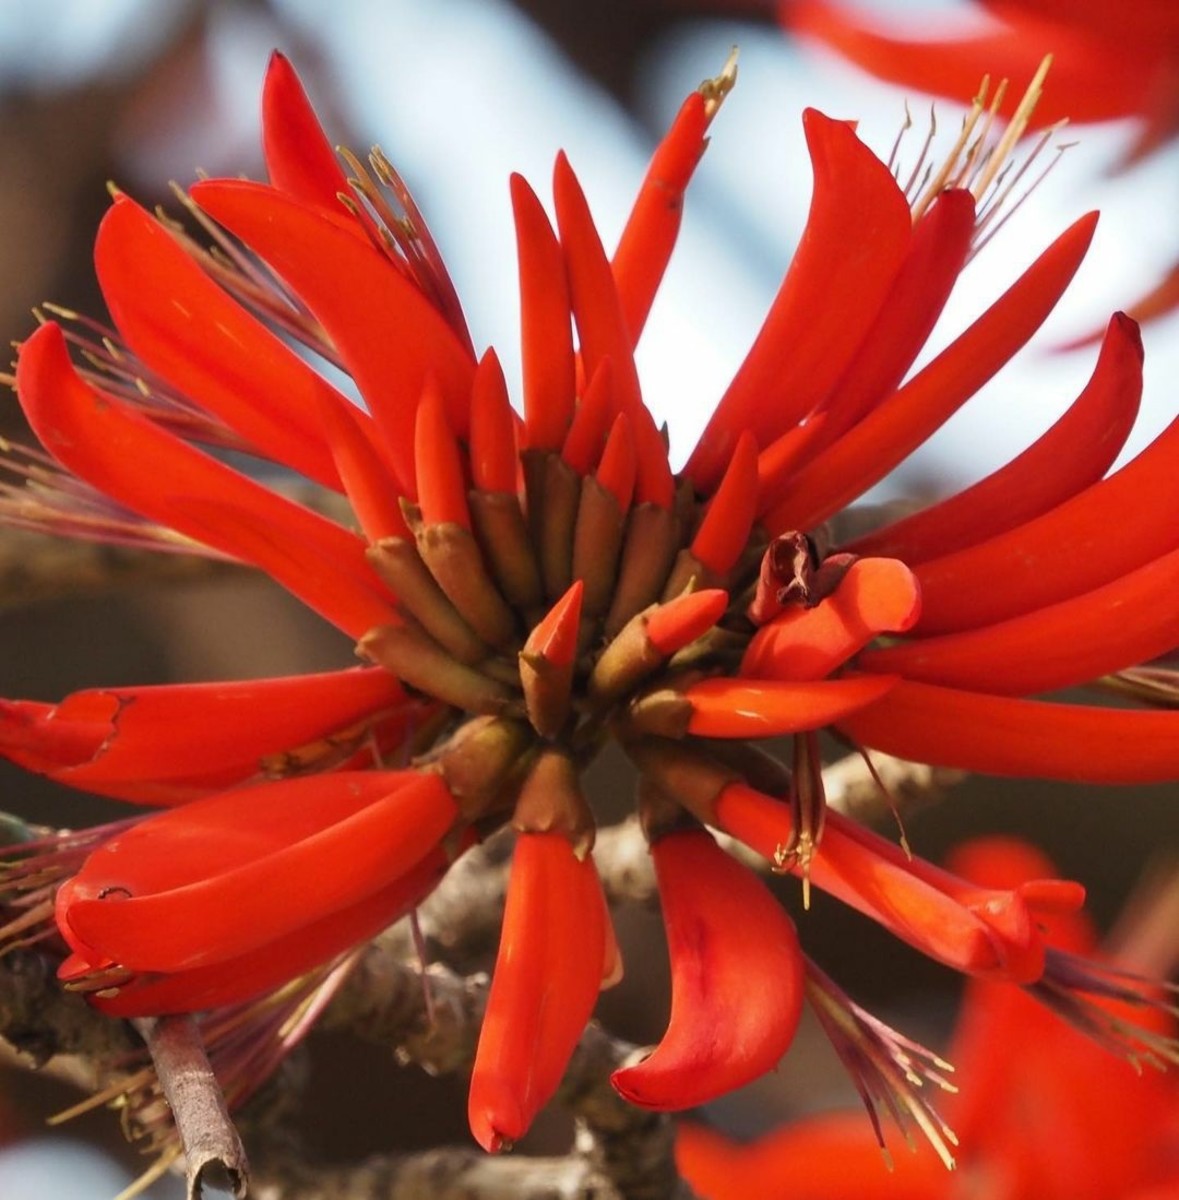 How Does the Delonix Regia or Royal Poinciana Tree Represent Cultural Significance?